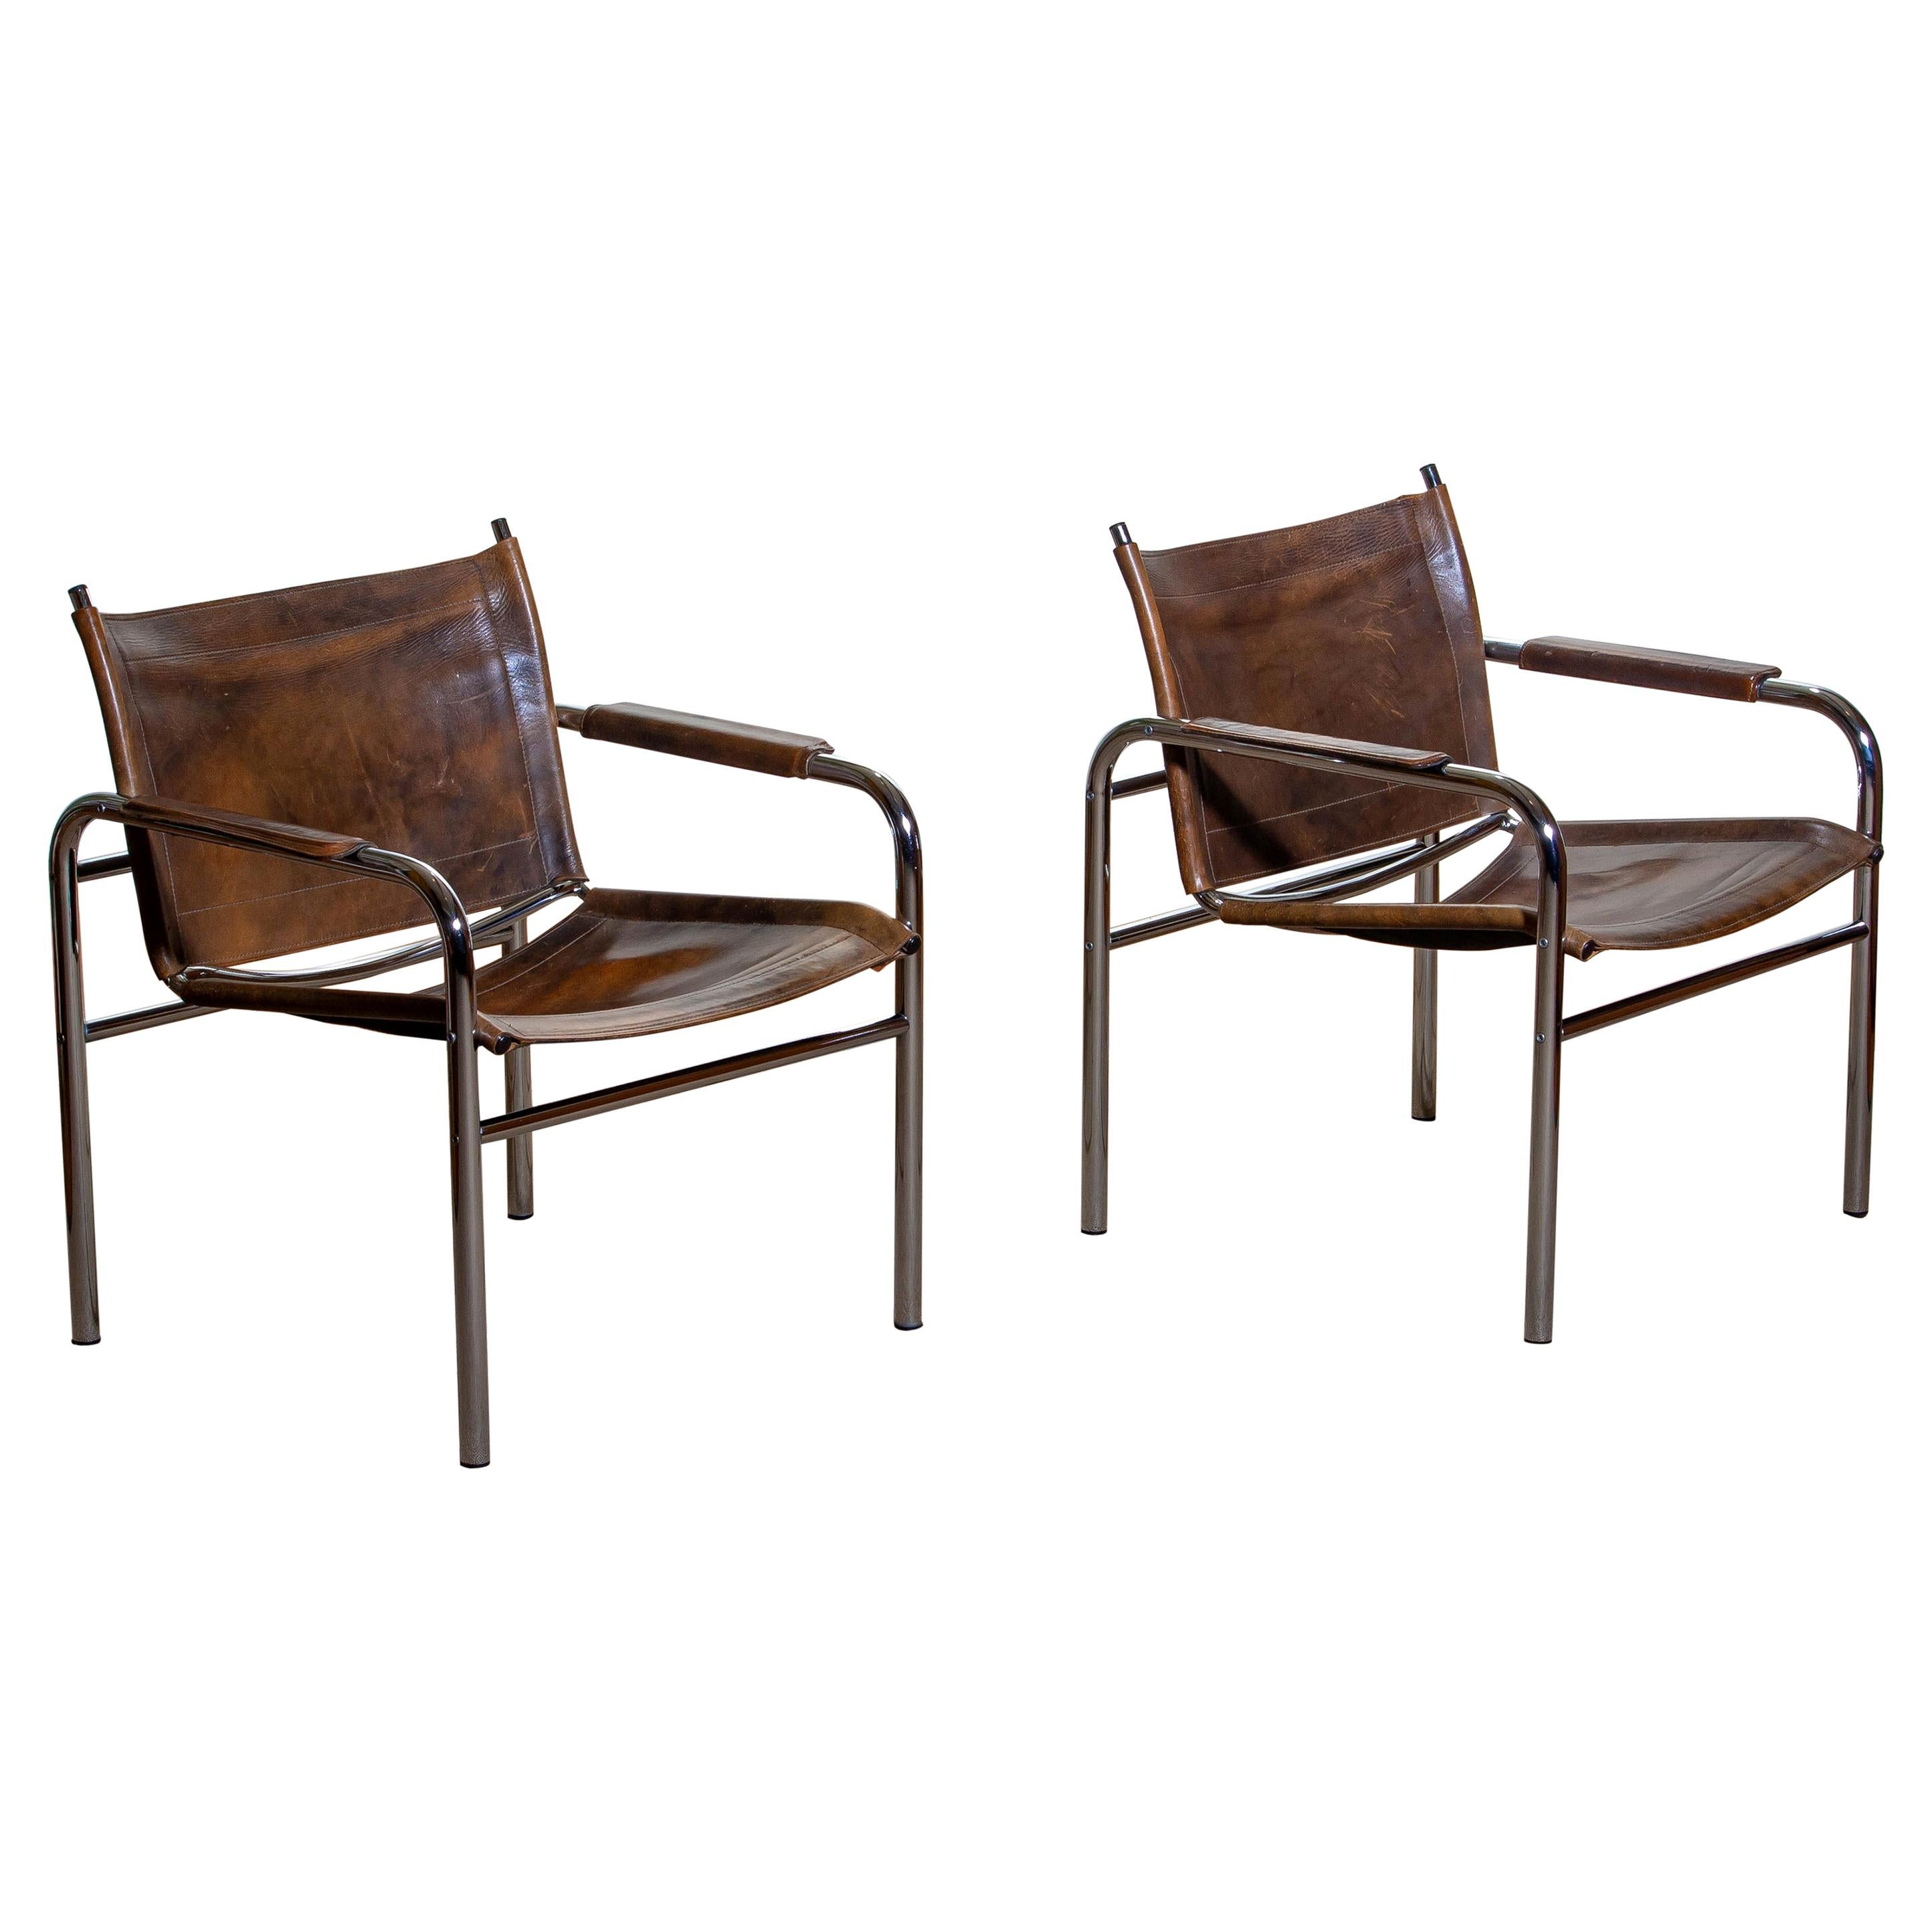 Swedish 1980s, Pair of Leather and Tubular Steel Armchairs by Tord Bjorklund, Sweden